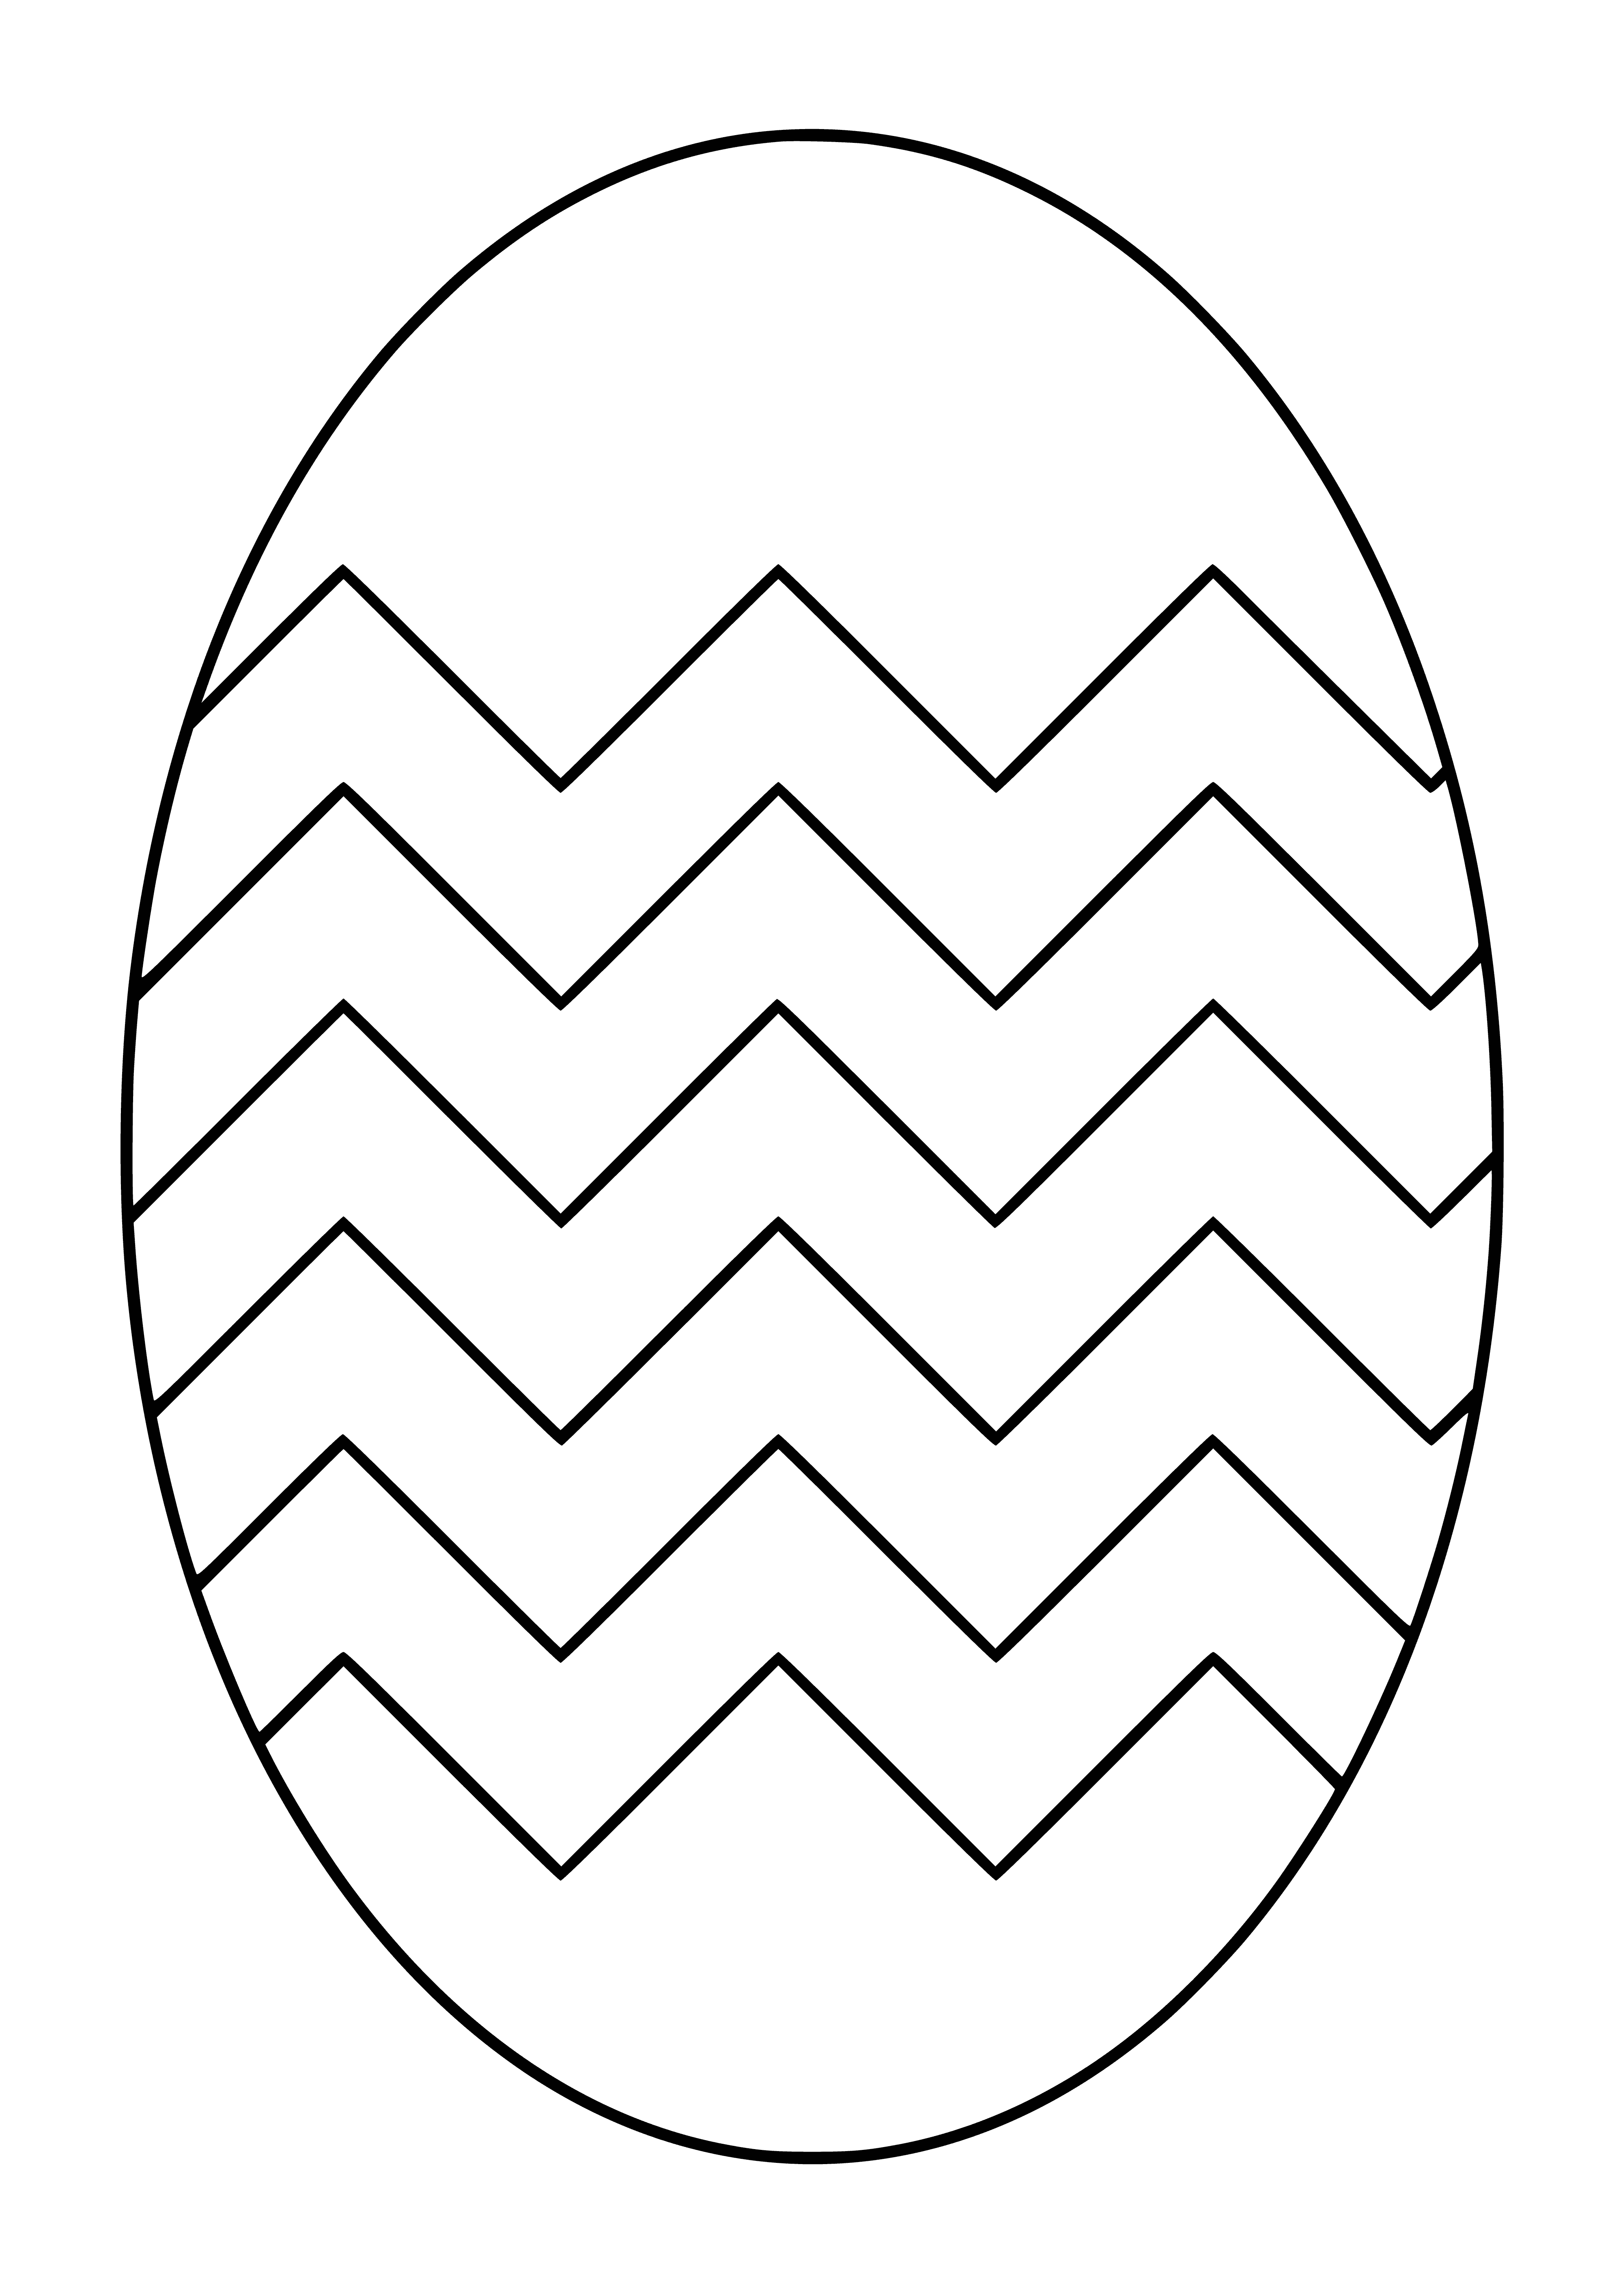 coloring page: A bright pink egg w/blue & purple dots is in the center, with two yellow flowers on either side & a blue butterfly flying above.